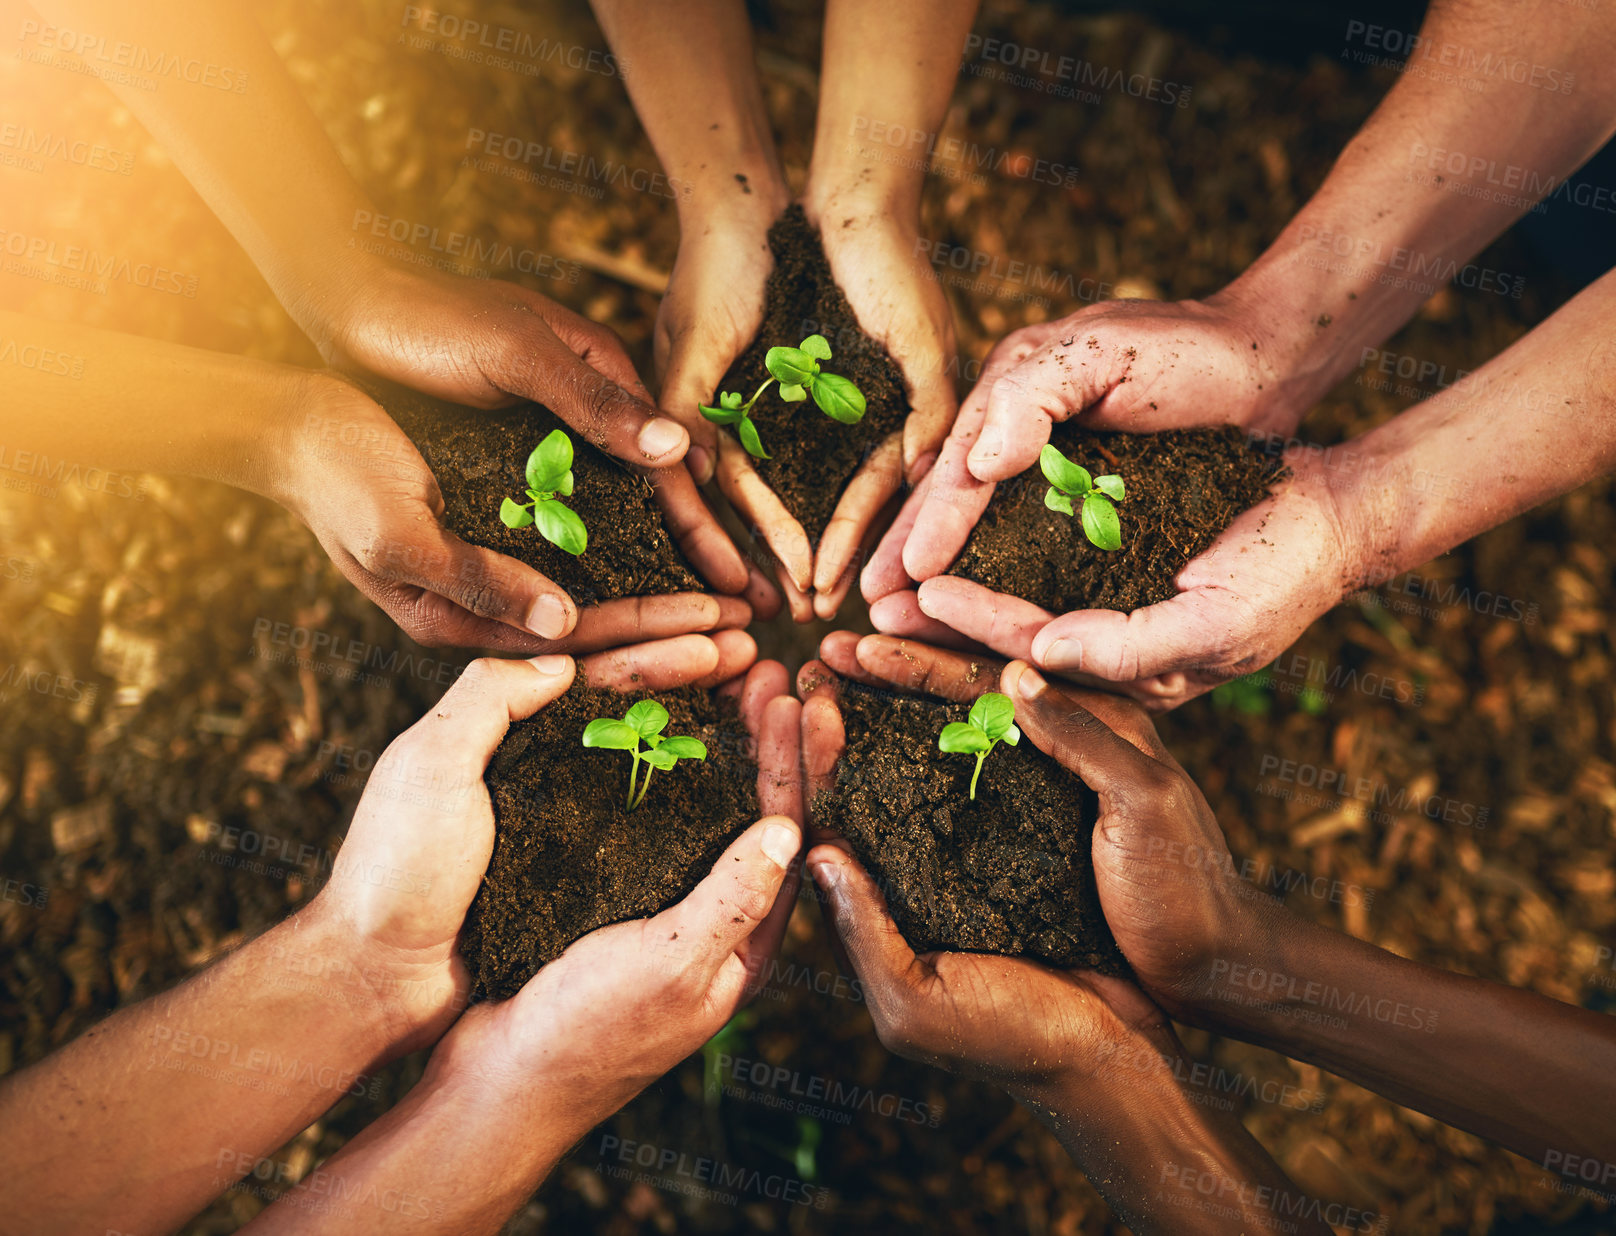 Buy stock photo Closeup shot of a group of unrecognizable people holding plants growing out of soil